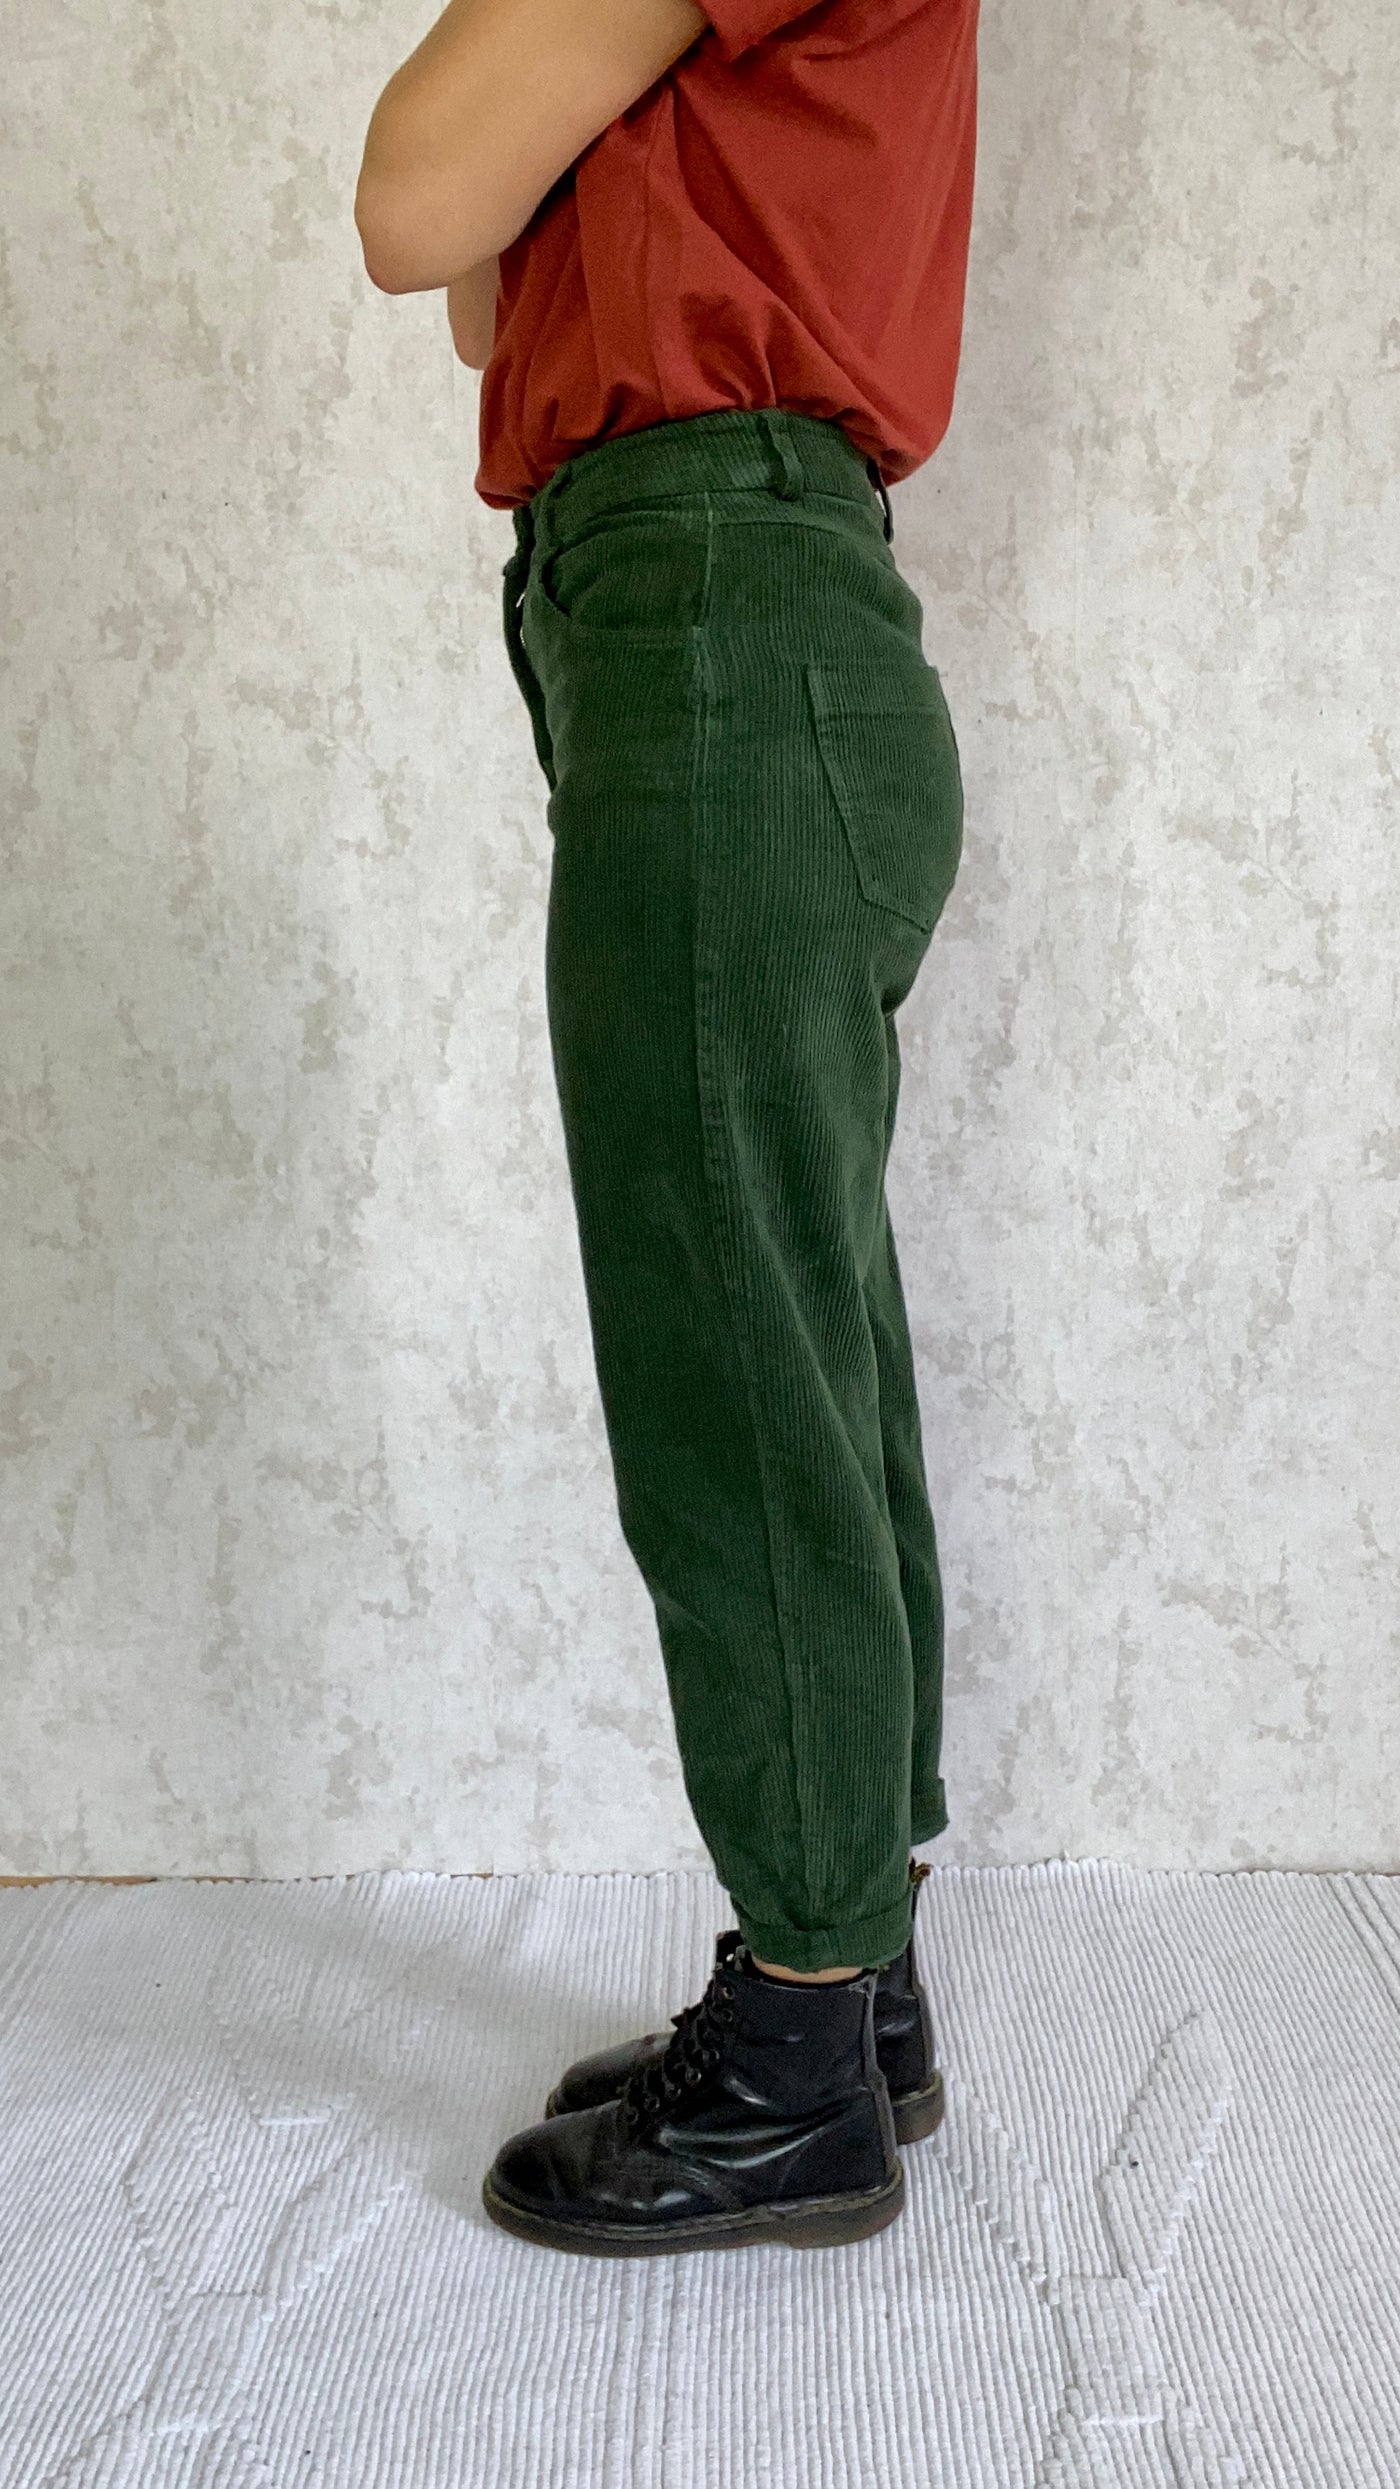 A woman wearing the Cordhose retro 1990 made in Italy pants and a red shirt.